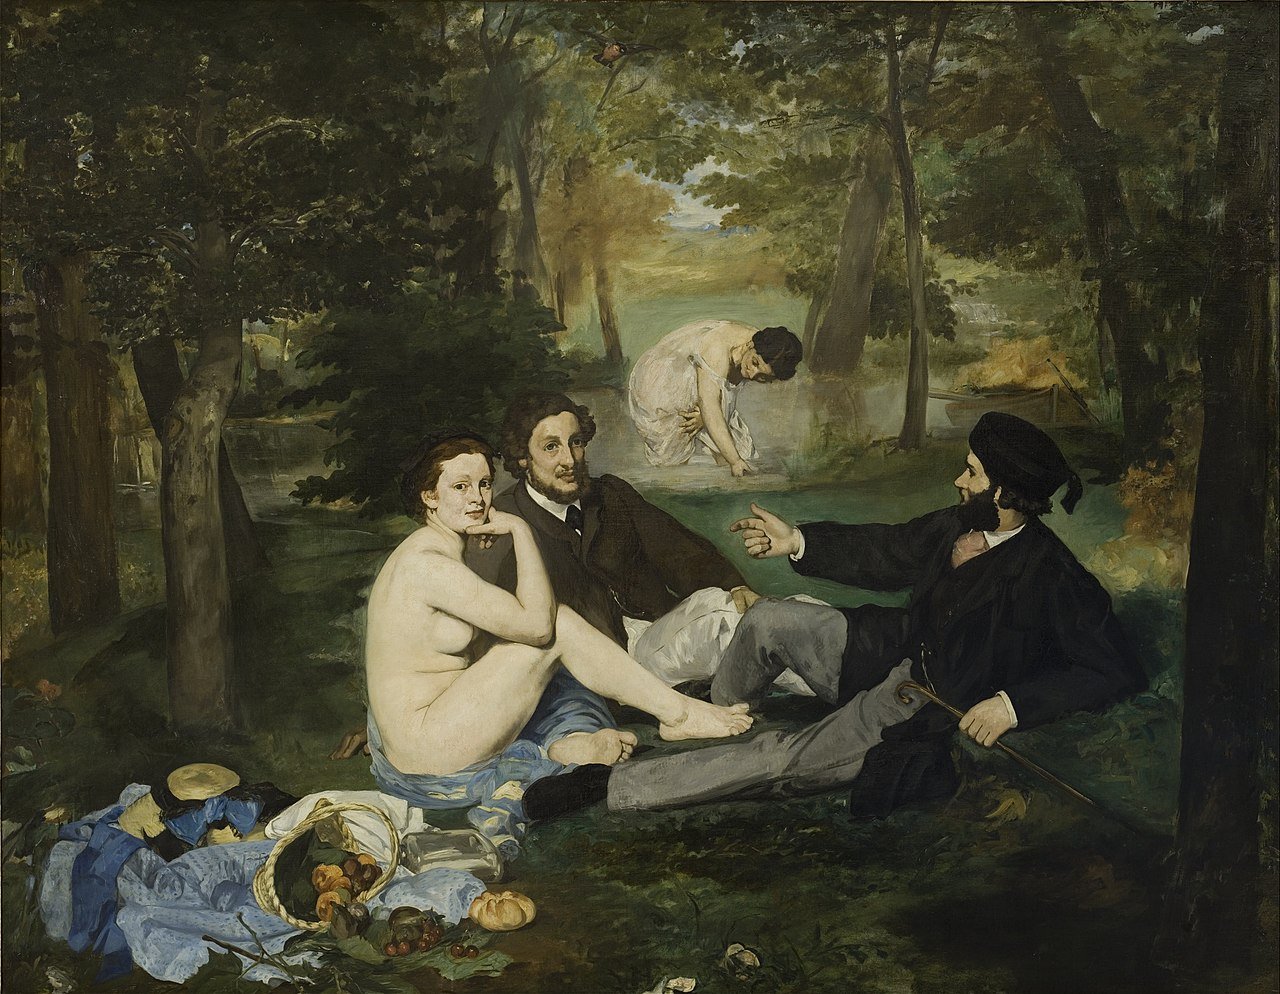 The Luncheon on the Grass by Édouard Manet